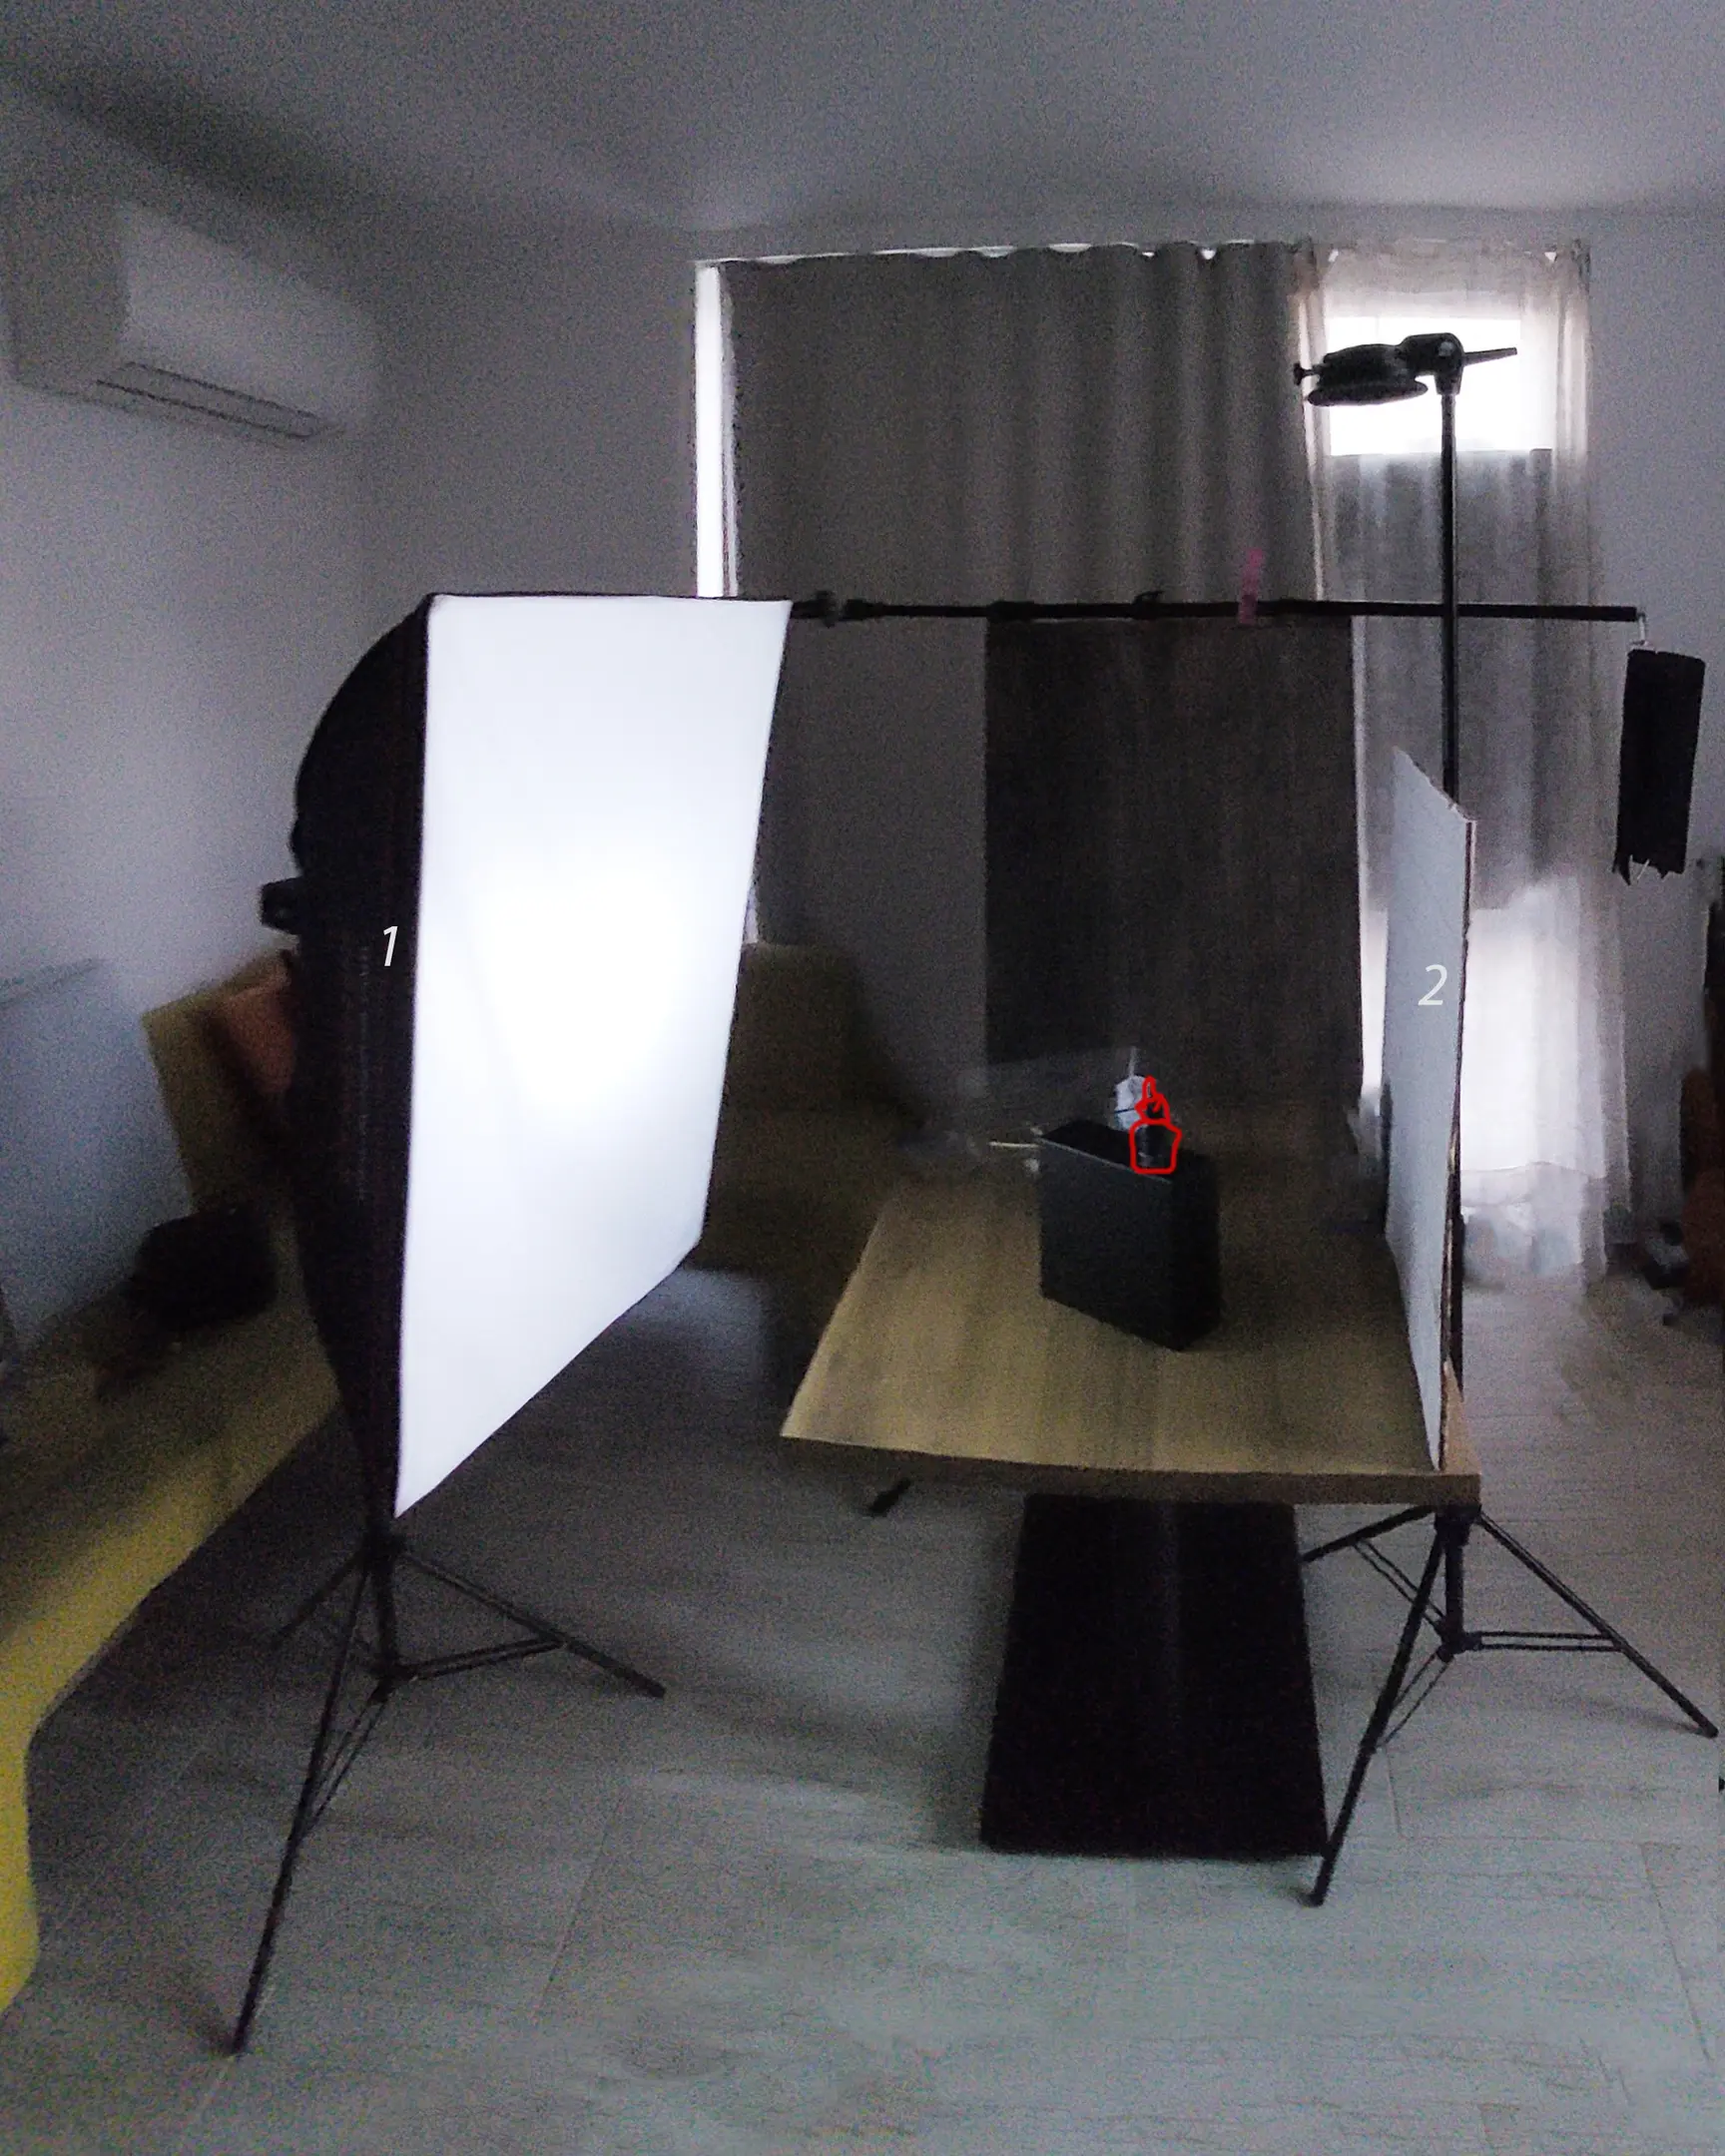 Light schema 1 for the photo with one light and fire. The picture shows the lighting scheme. There is a flash with a strip box in the room. There is a black box on the table with the subject on it. To the right of the object is a reflector. It has the number 2 written on it.